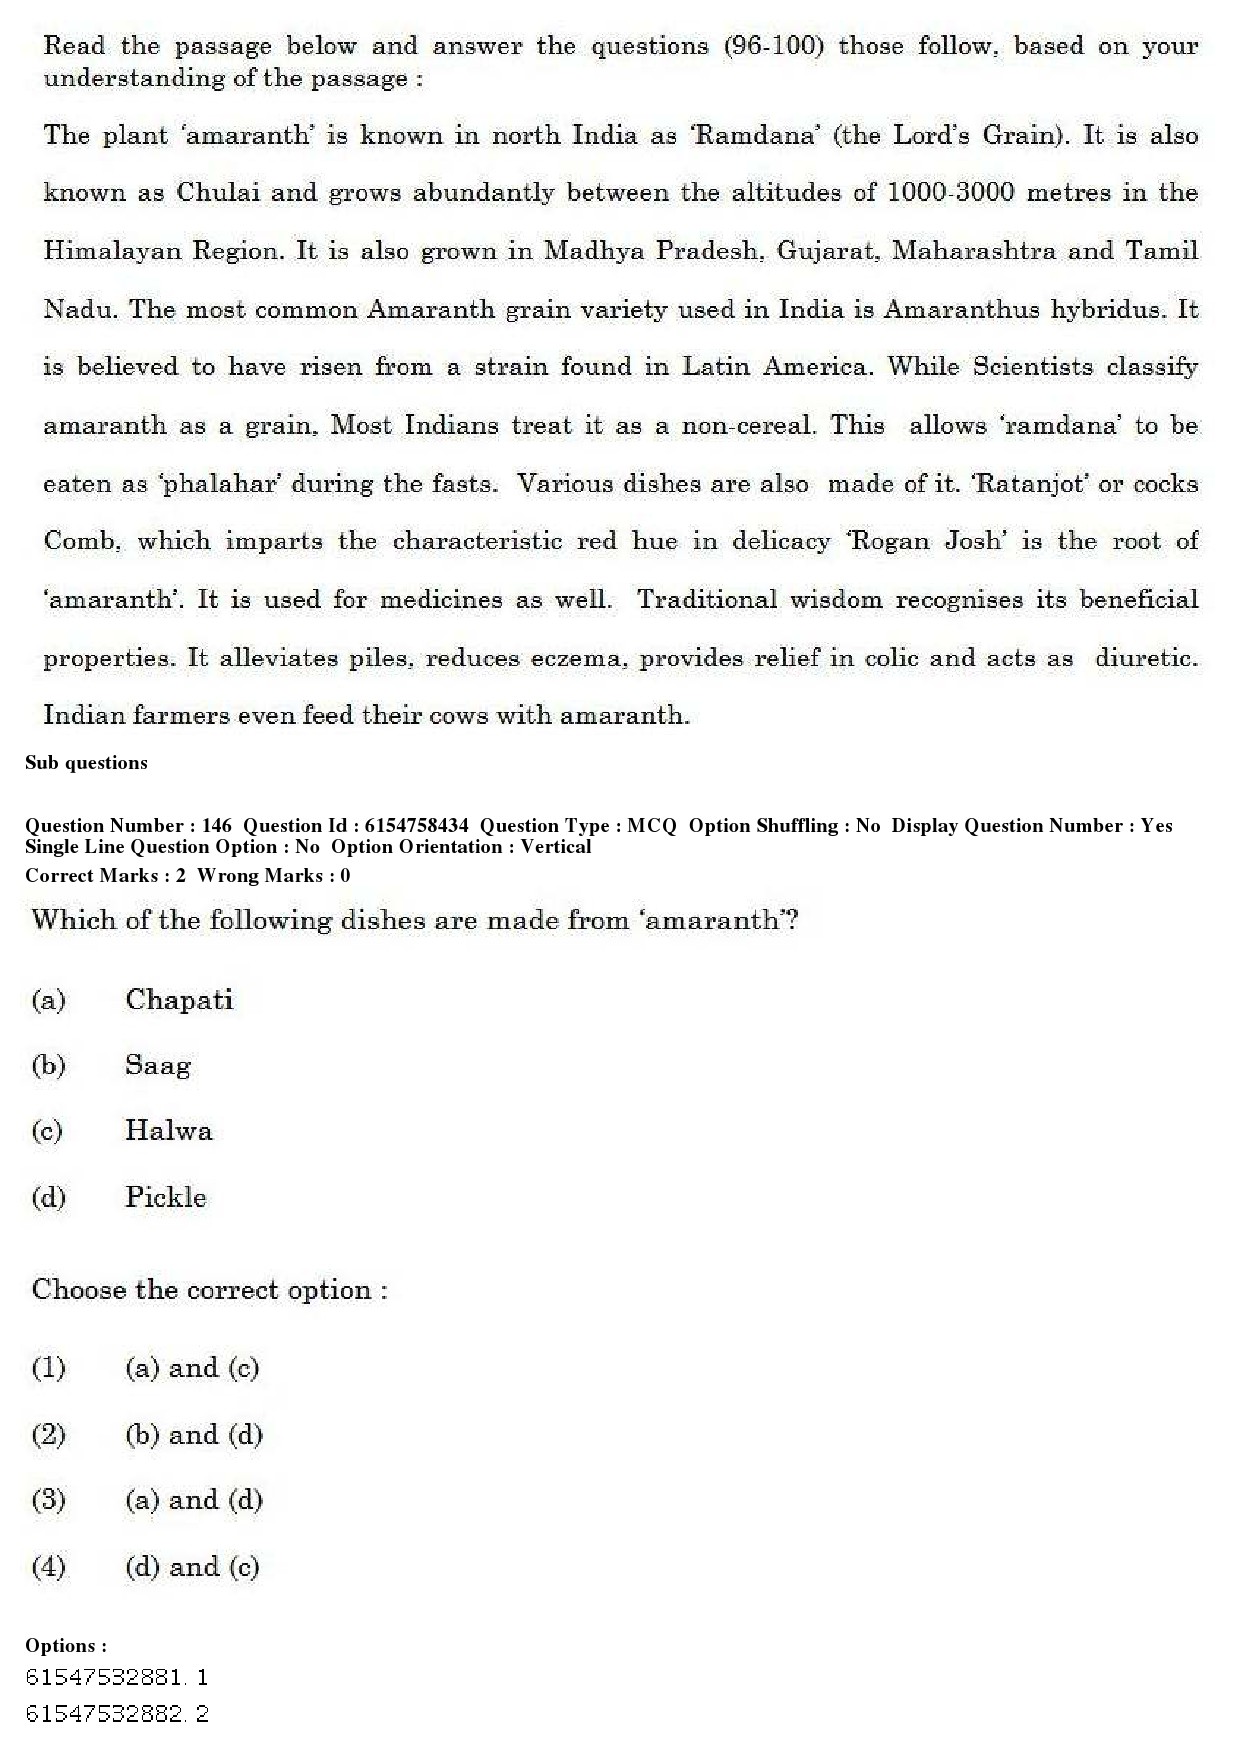 UGC NET Tourism Administration And Management Question Paper December 2019 167